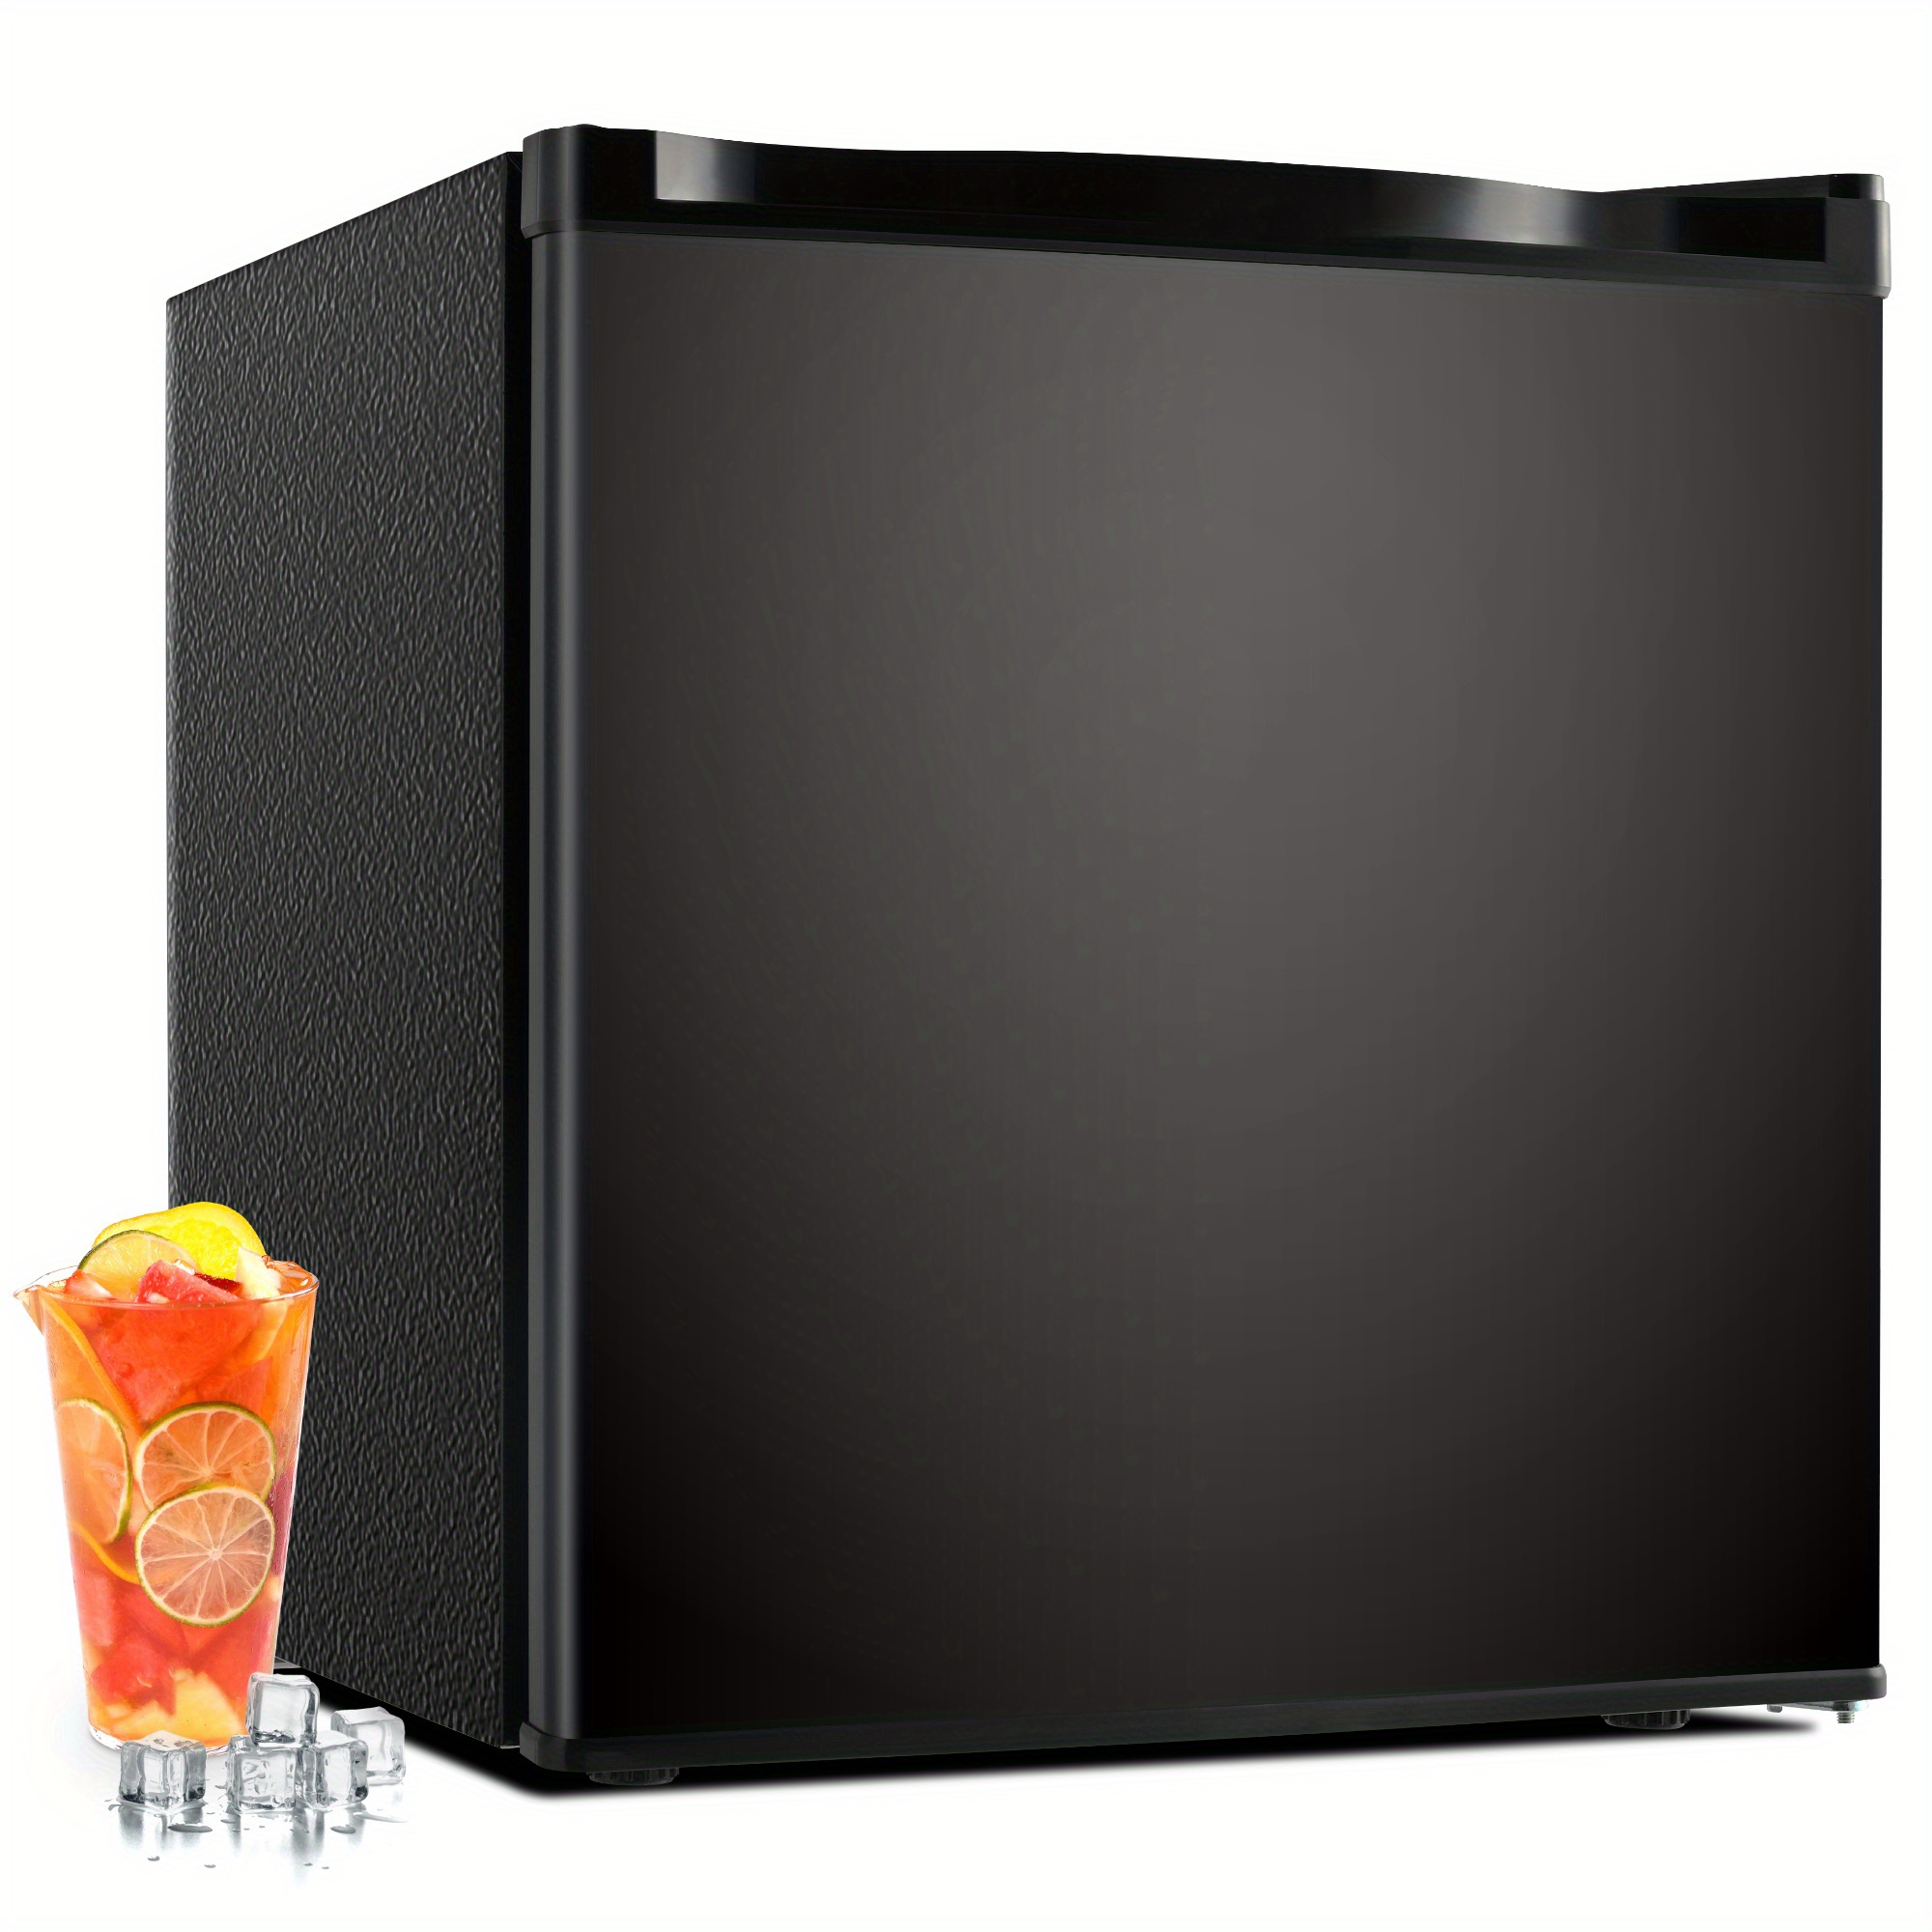 

1.7 Cu.ft Mini Fridge With Freezer: Sleek Black, Energy-efficient With Adjustable Thermostat, Reversible Single Door - Perfect For Bedrooms, Offices, Dorms.